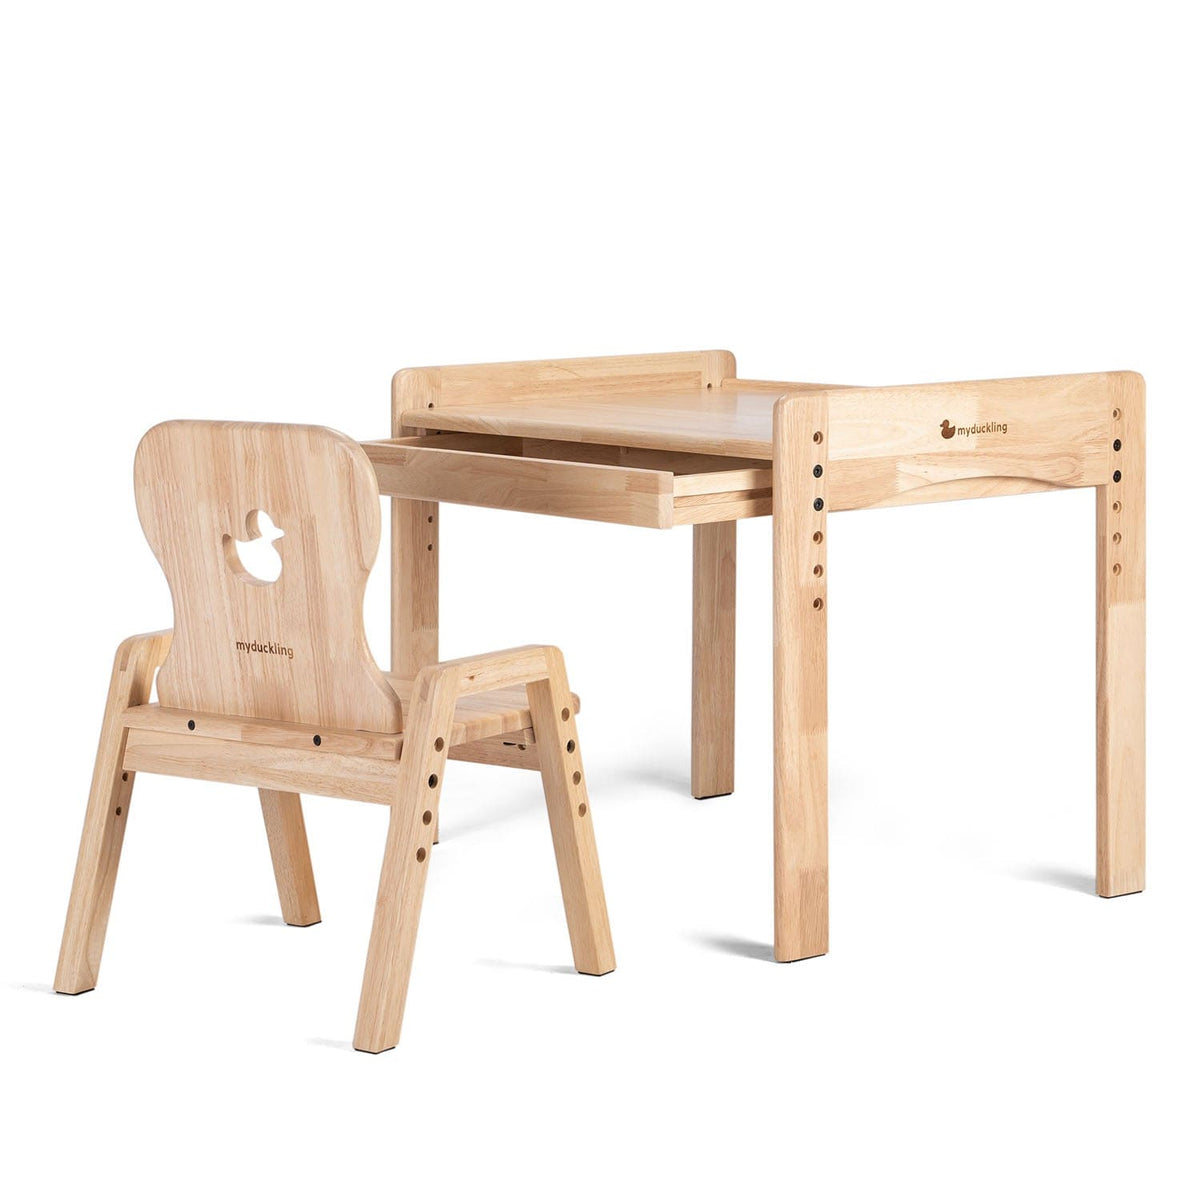 My Duckling KAYA Primary Adjustable Table and Chair Set